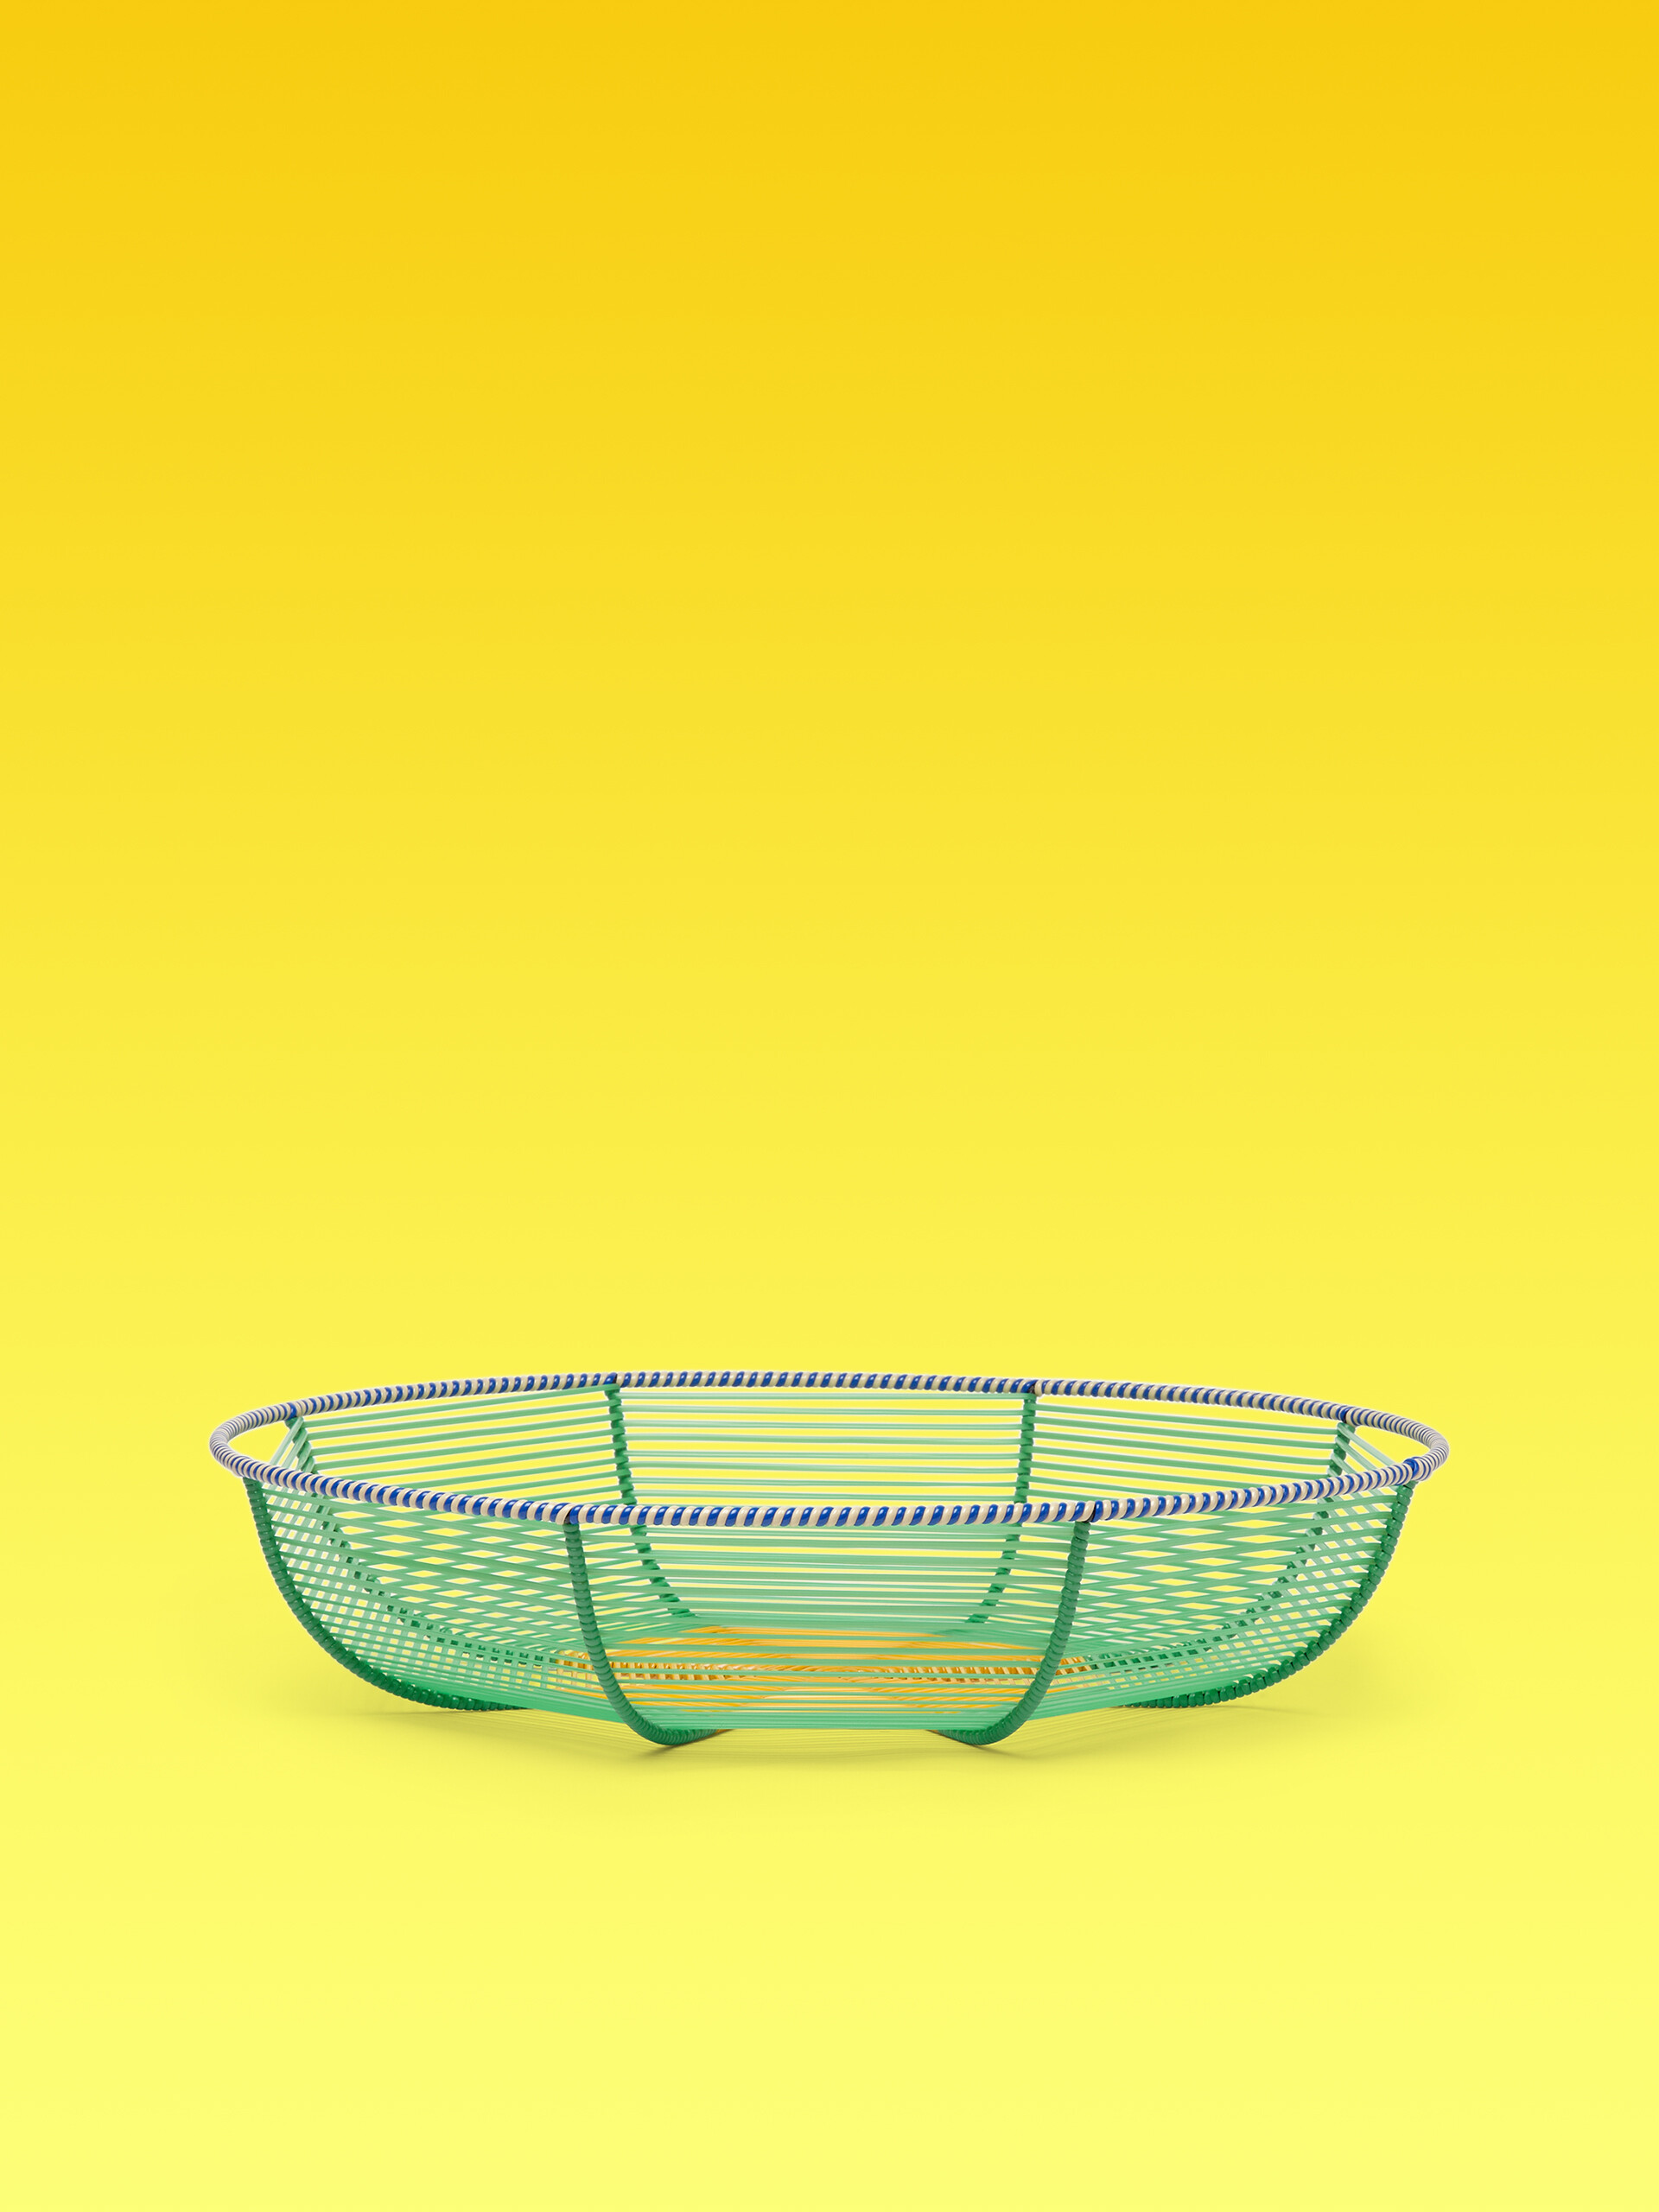 MARNI MARKET large circular green and yellow fruit holder - Accessories - Image 1